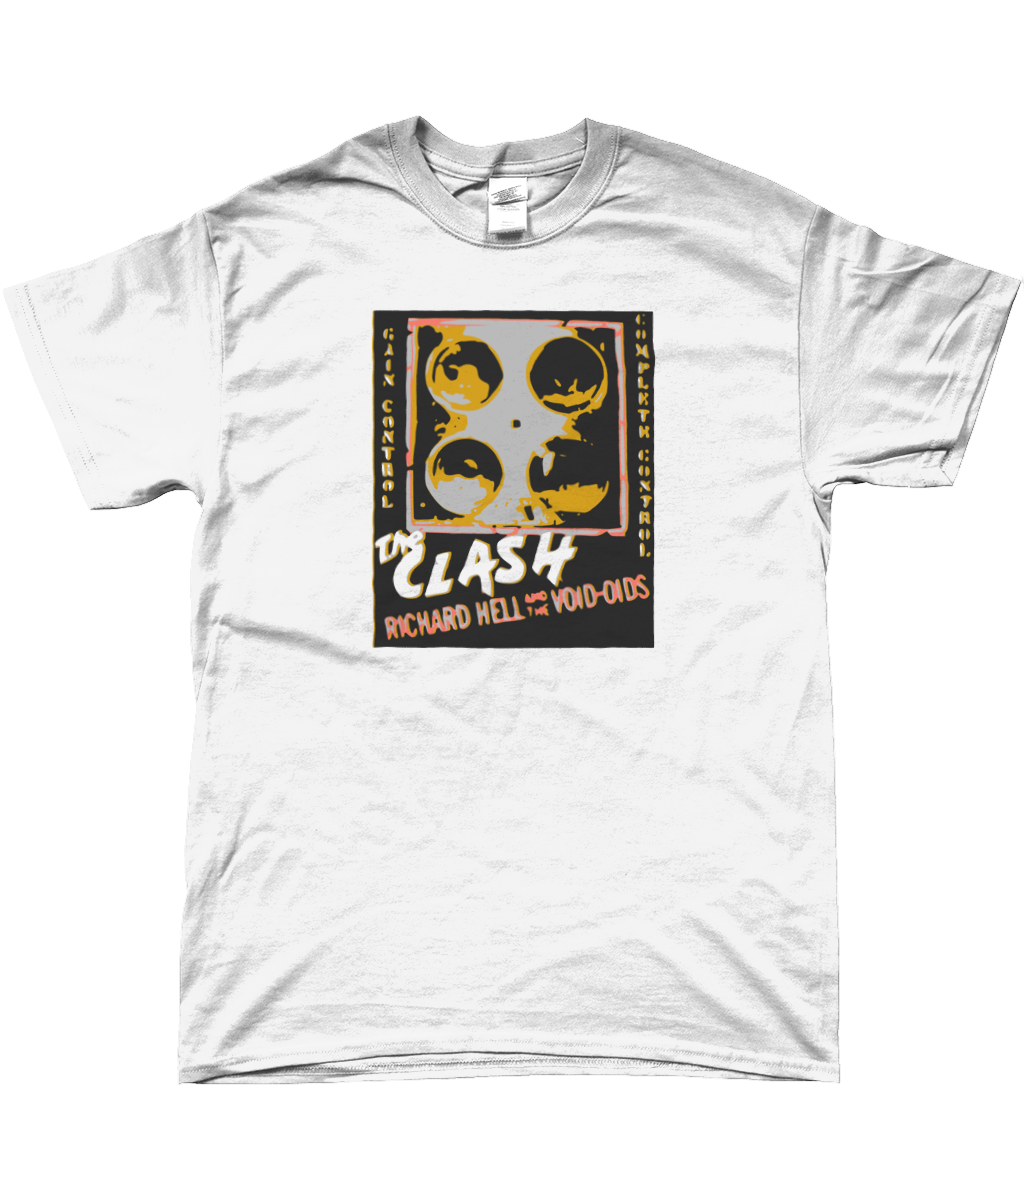 The Clash Out of Control 1977 Tour t-shirt